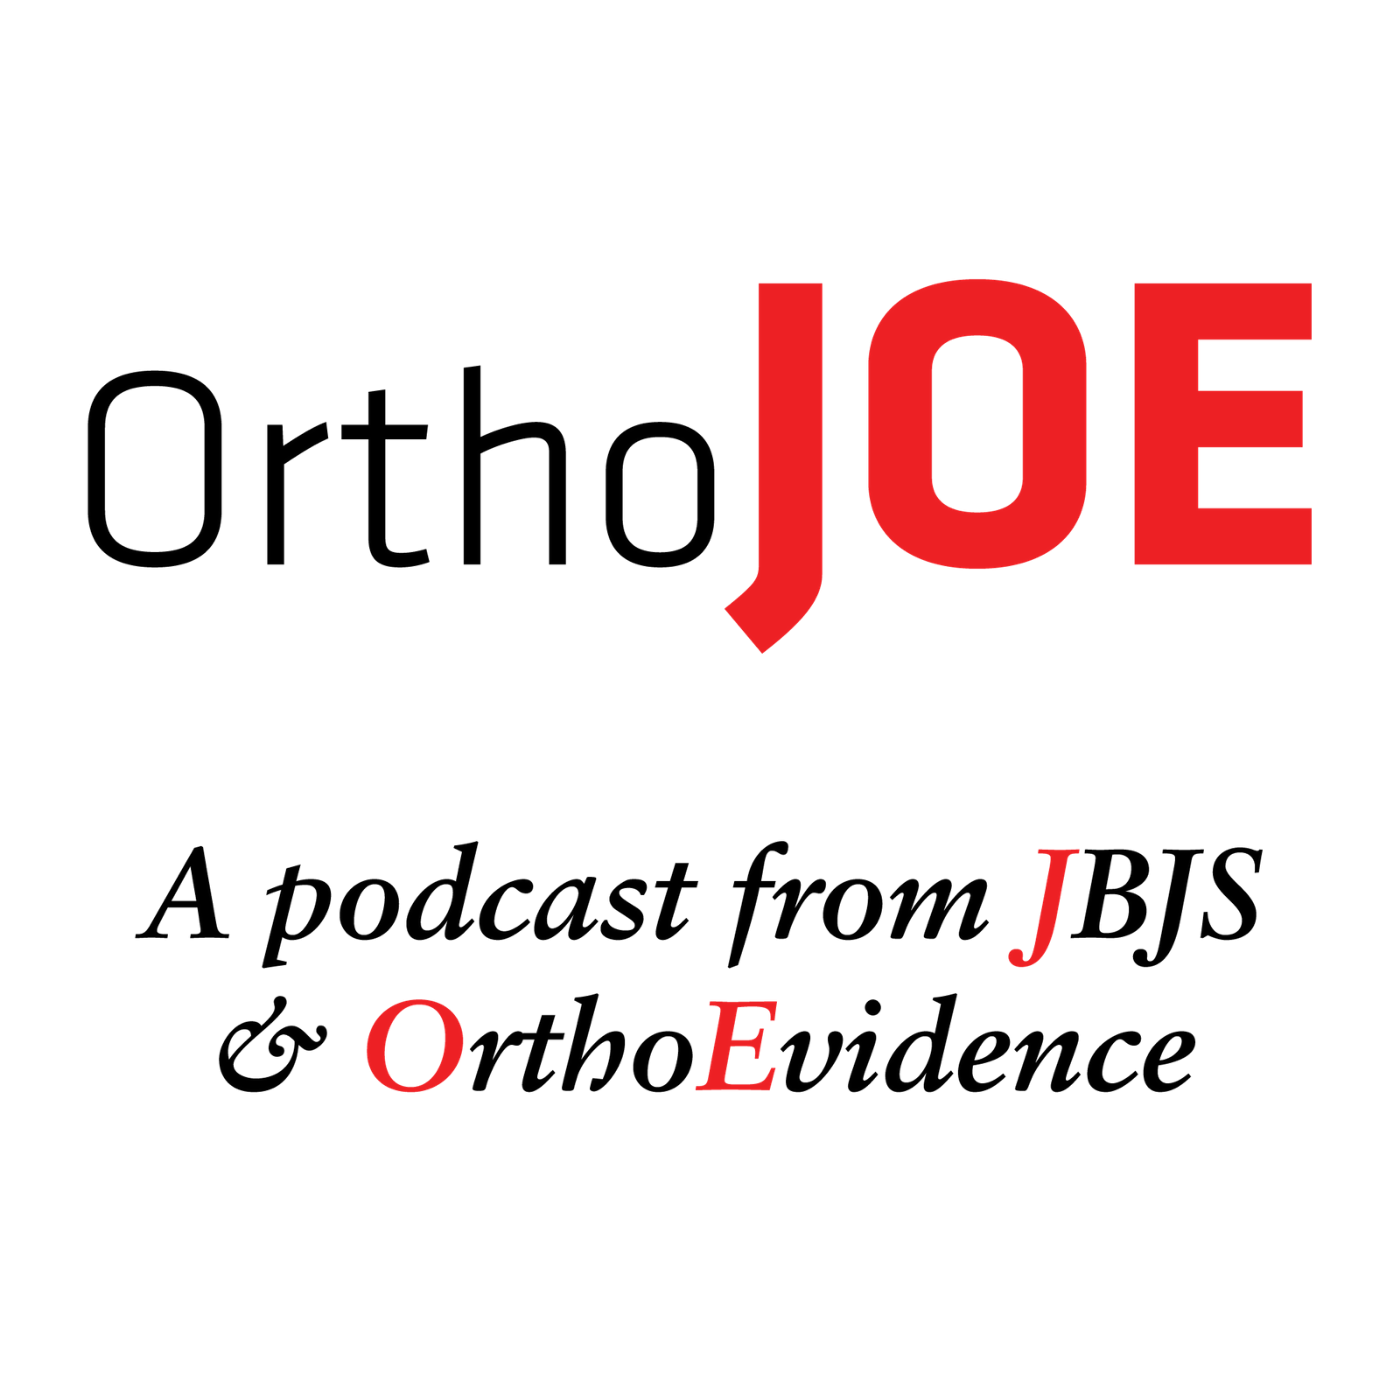 Orthobiologics in Orthopaedics, Part Deux (with special guest Asheesh Bedi)